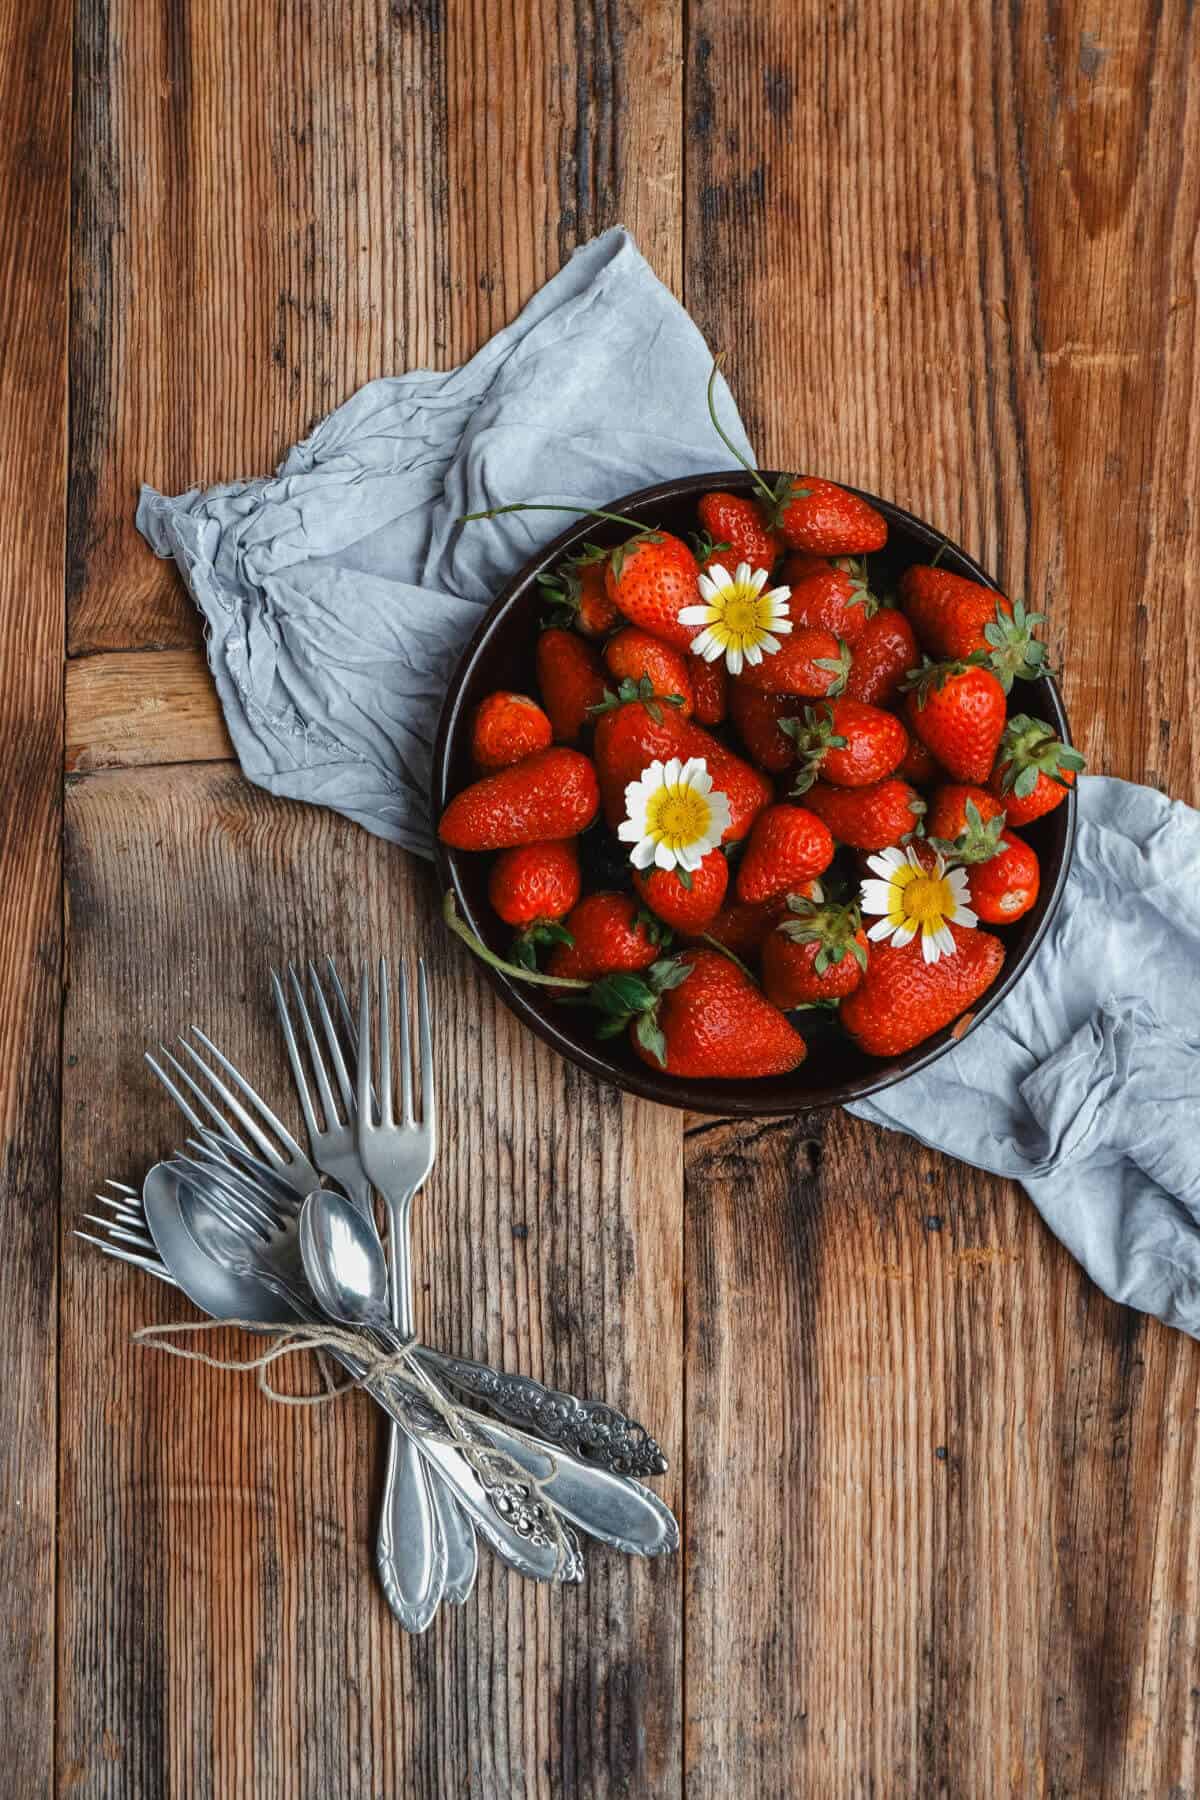 Bowl for fresh strawberries with a few small flowers on top on a rustic wood table, some antique flatware next to it tied up in twine.